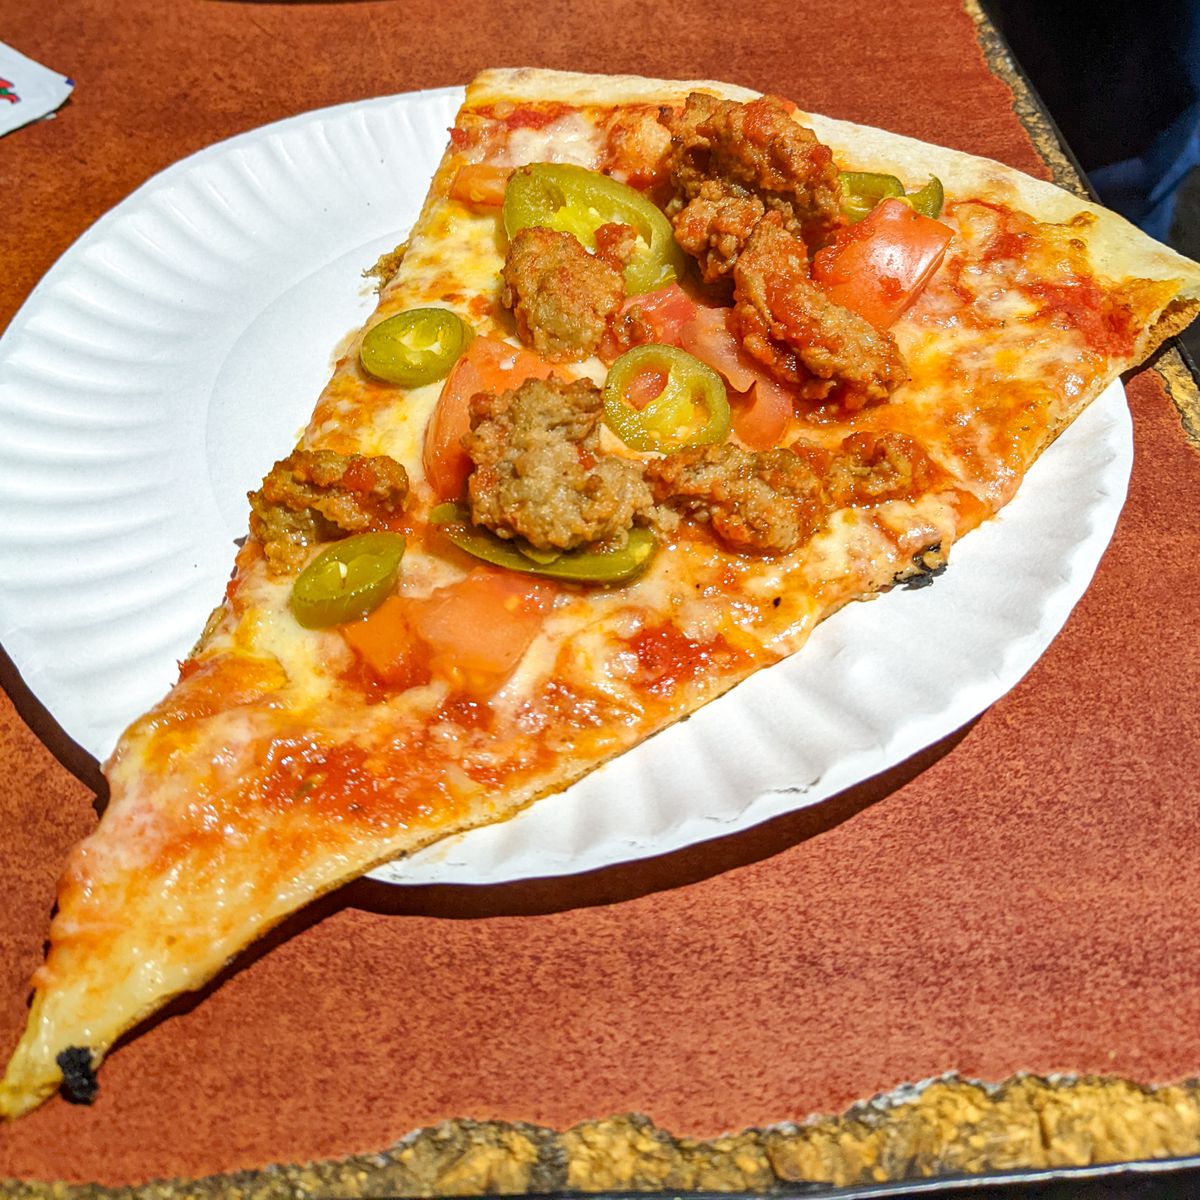 Pizza slice with meatballs, jalapenos, tomatoes, cheese and red sauce on a paper plate.